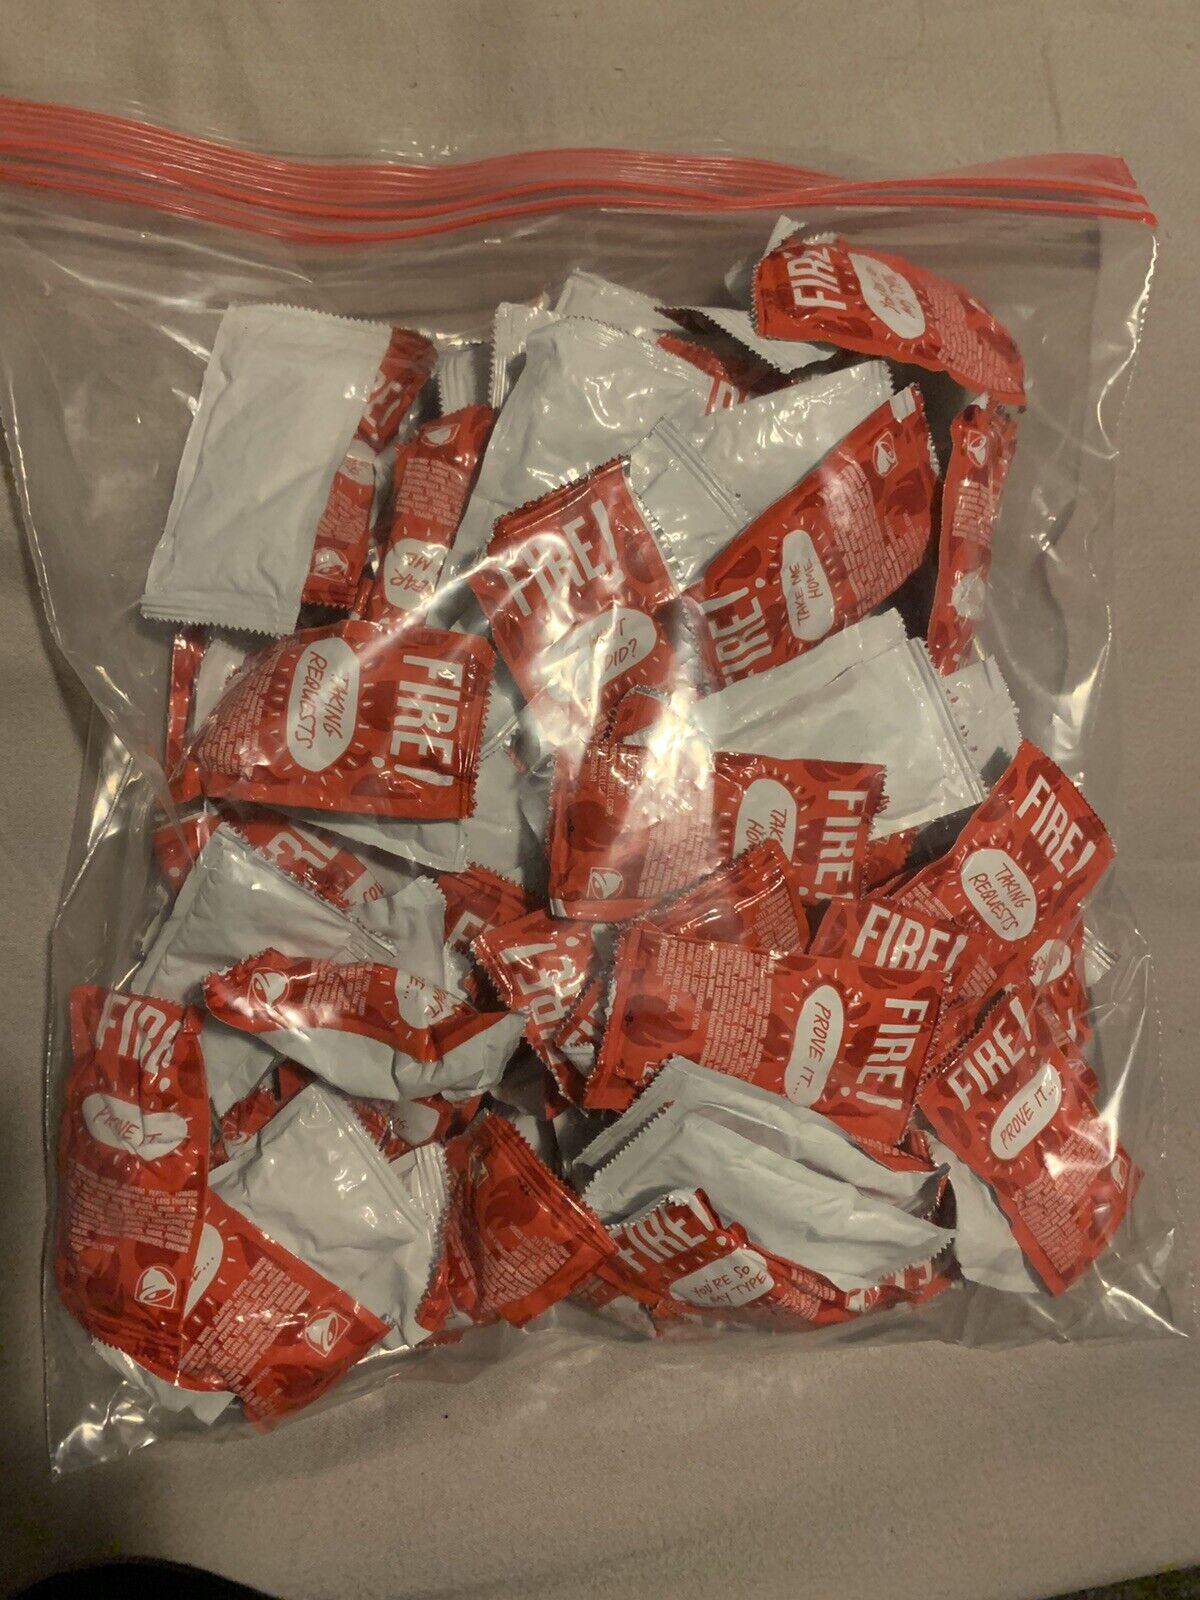 50 Taco Bell HOT  Sauce Packets.   New And Sealed Free Fast Shipping